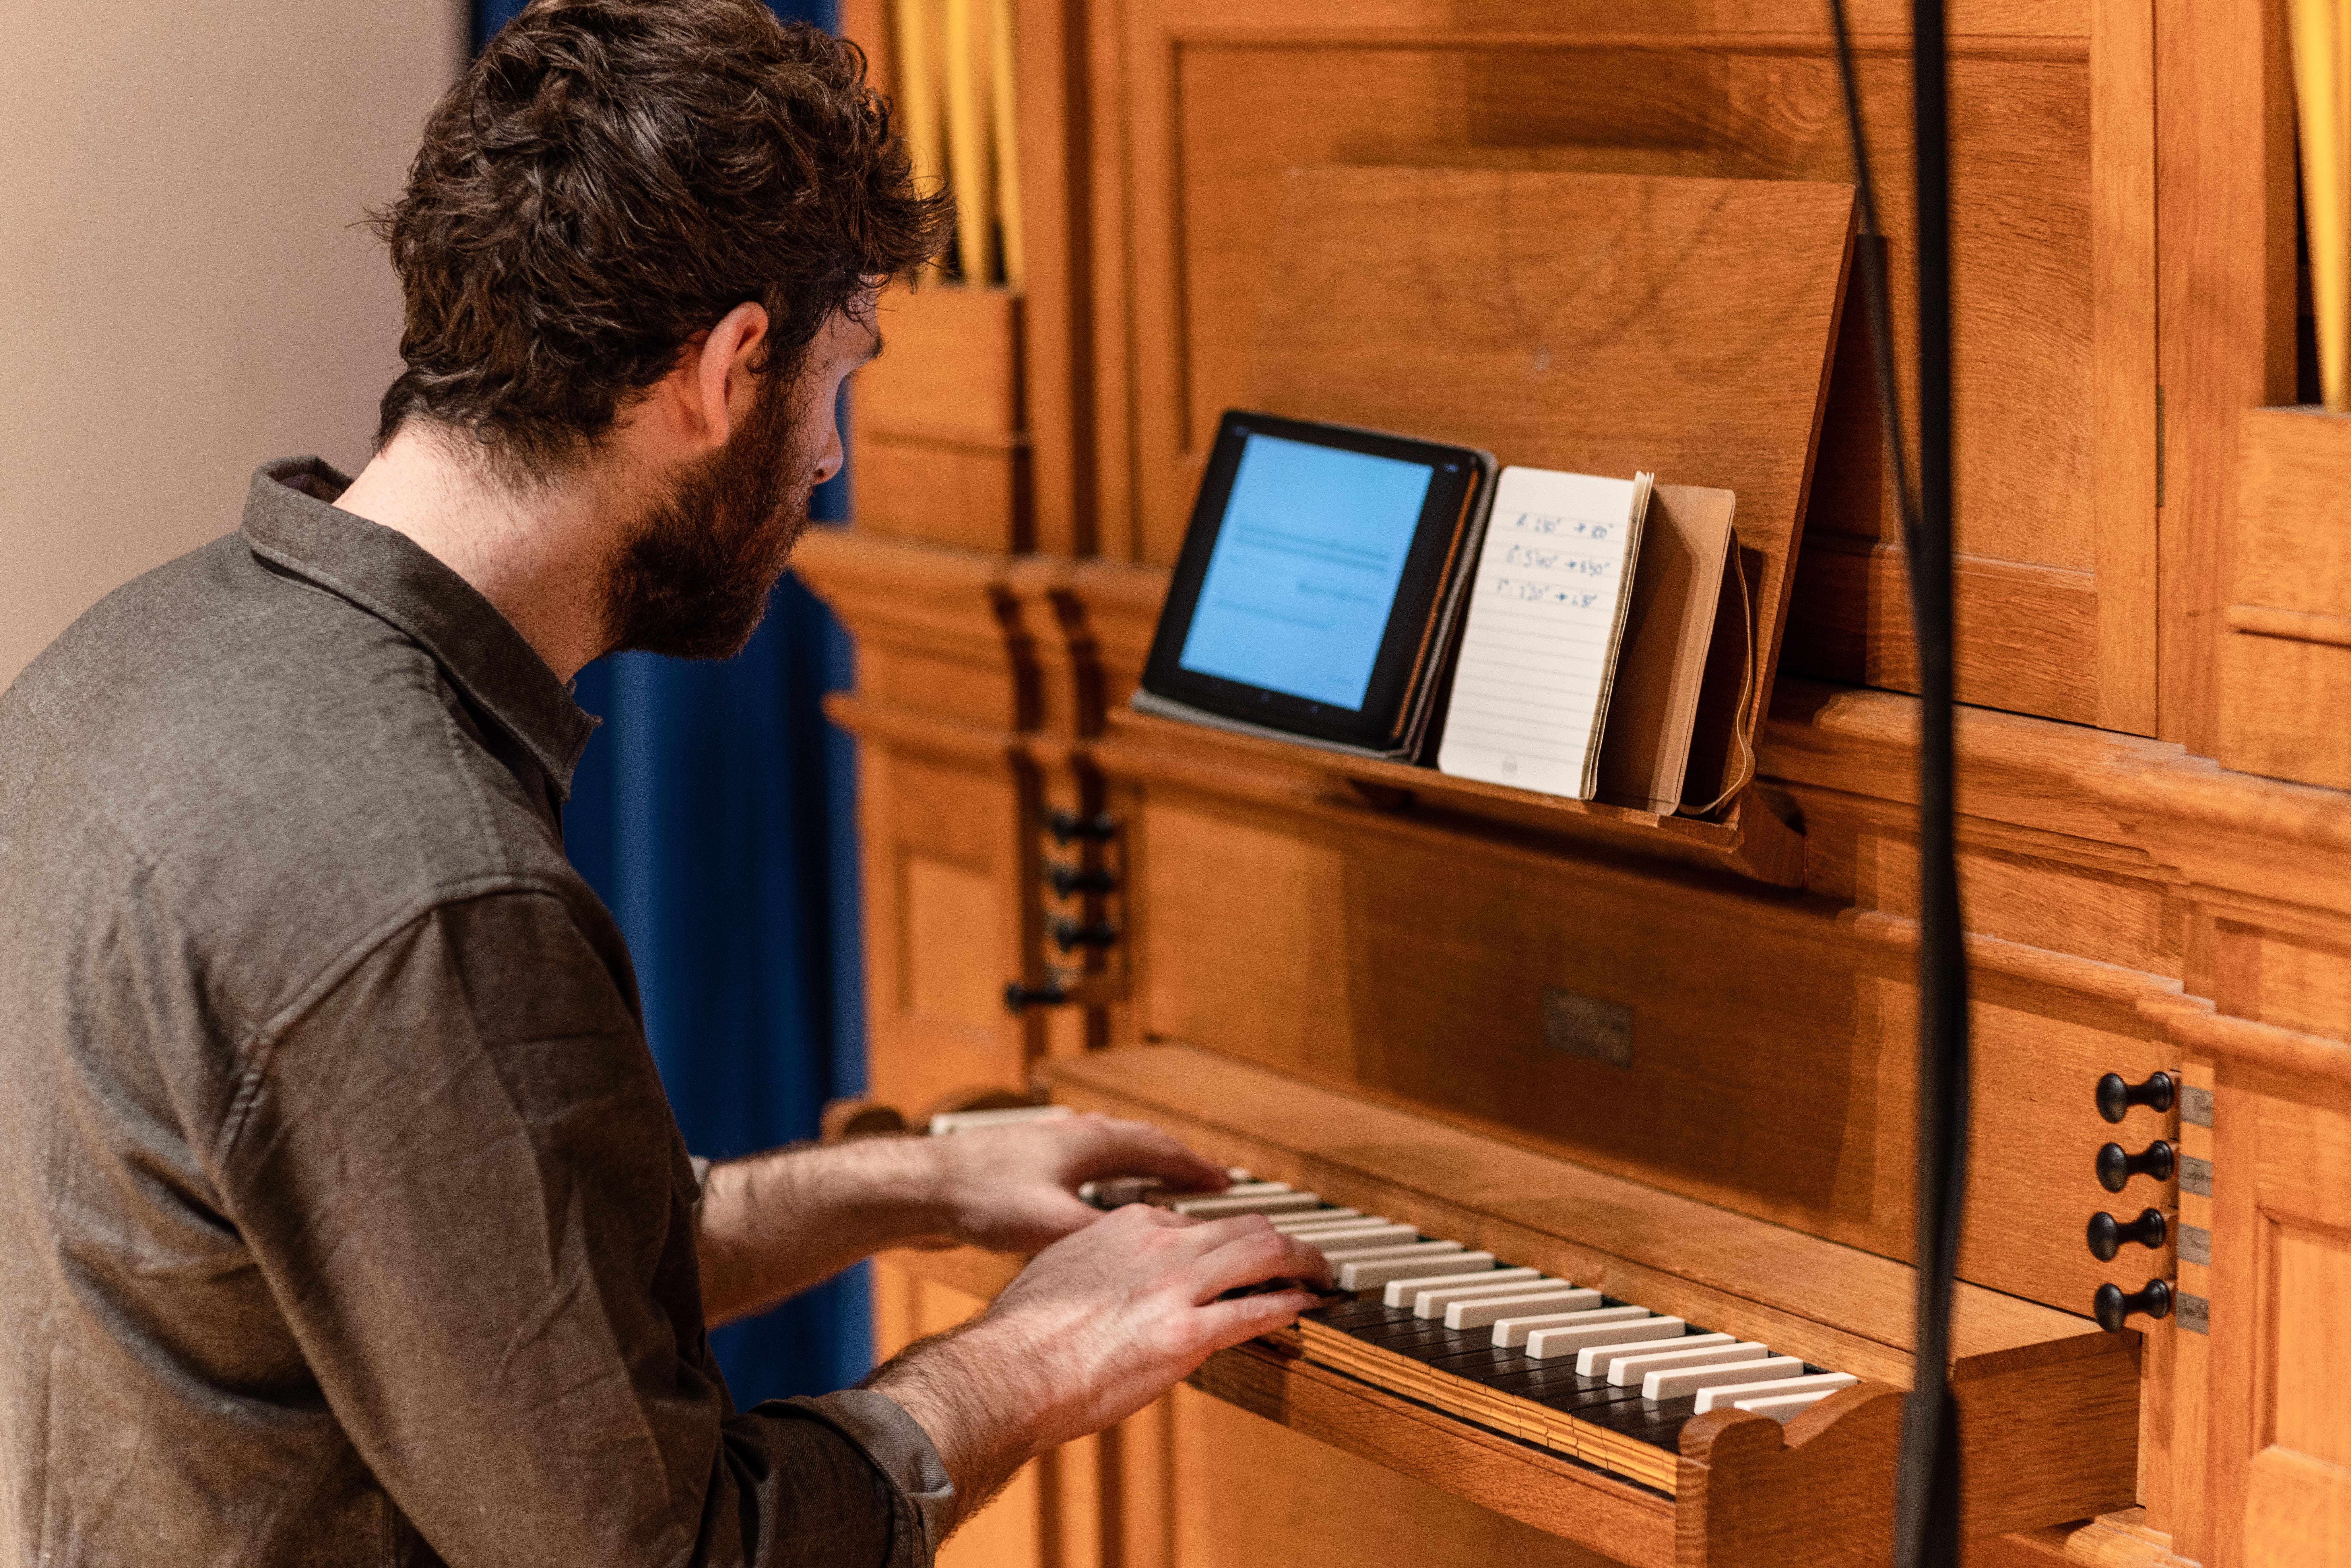 Student practicing on the chamber organ in the Clothworkers Centenary Concert Hall, the image is taken from an angle to the side and they are looking at a screen as they play.